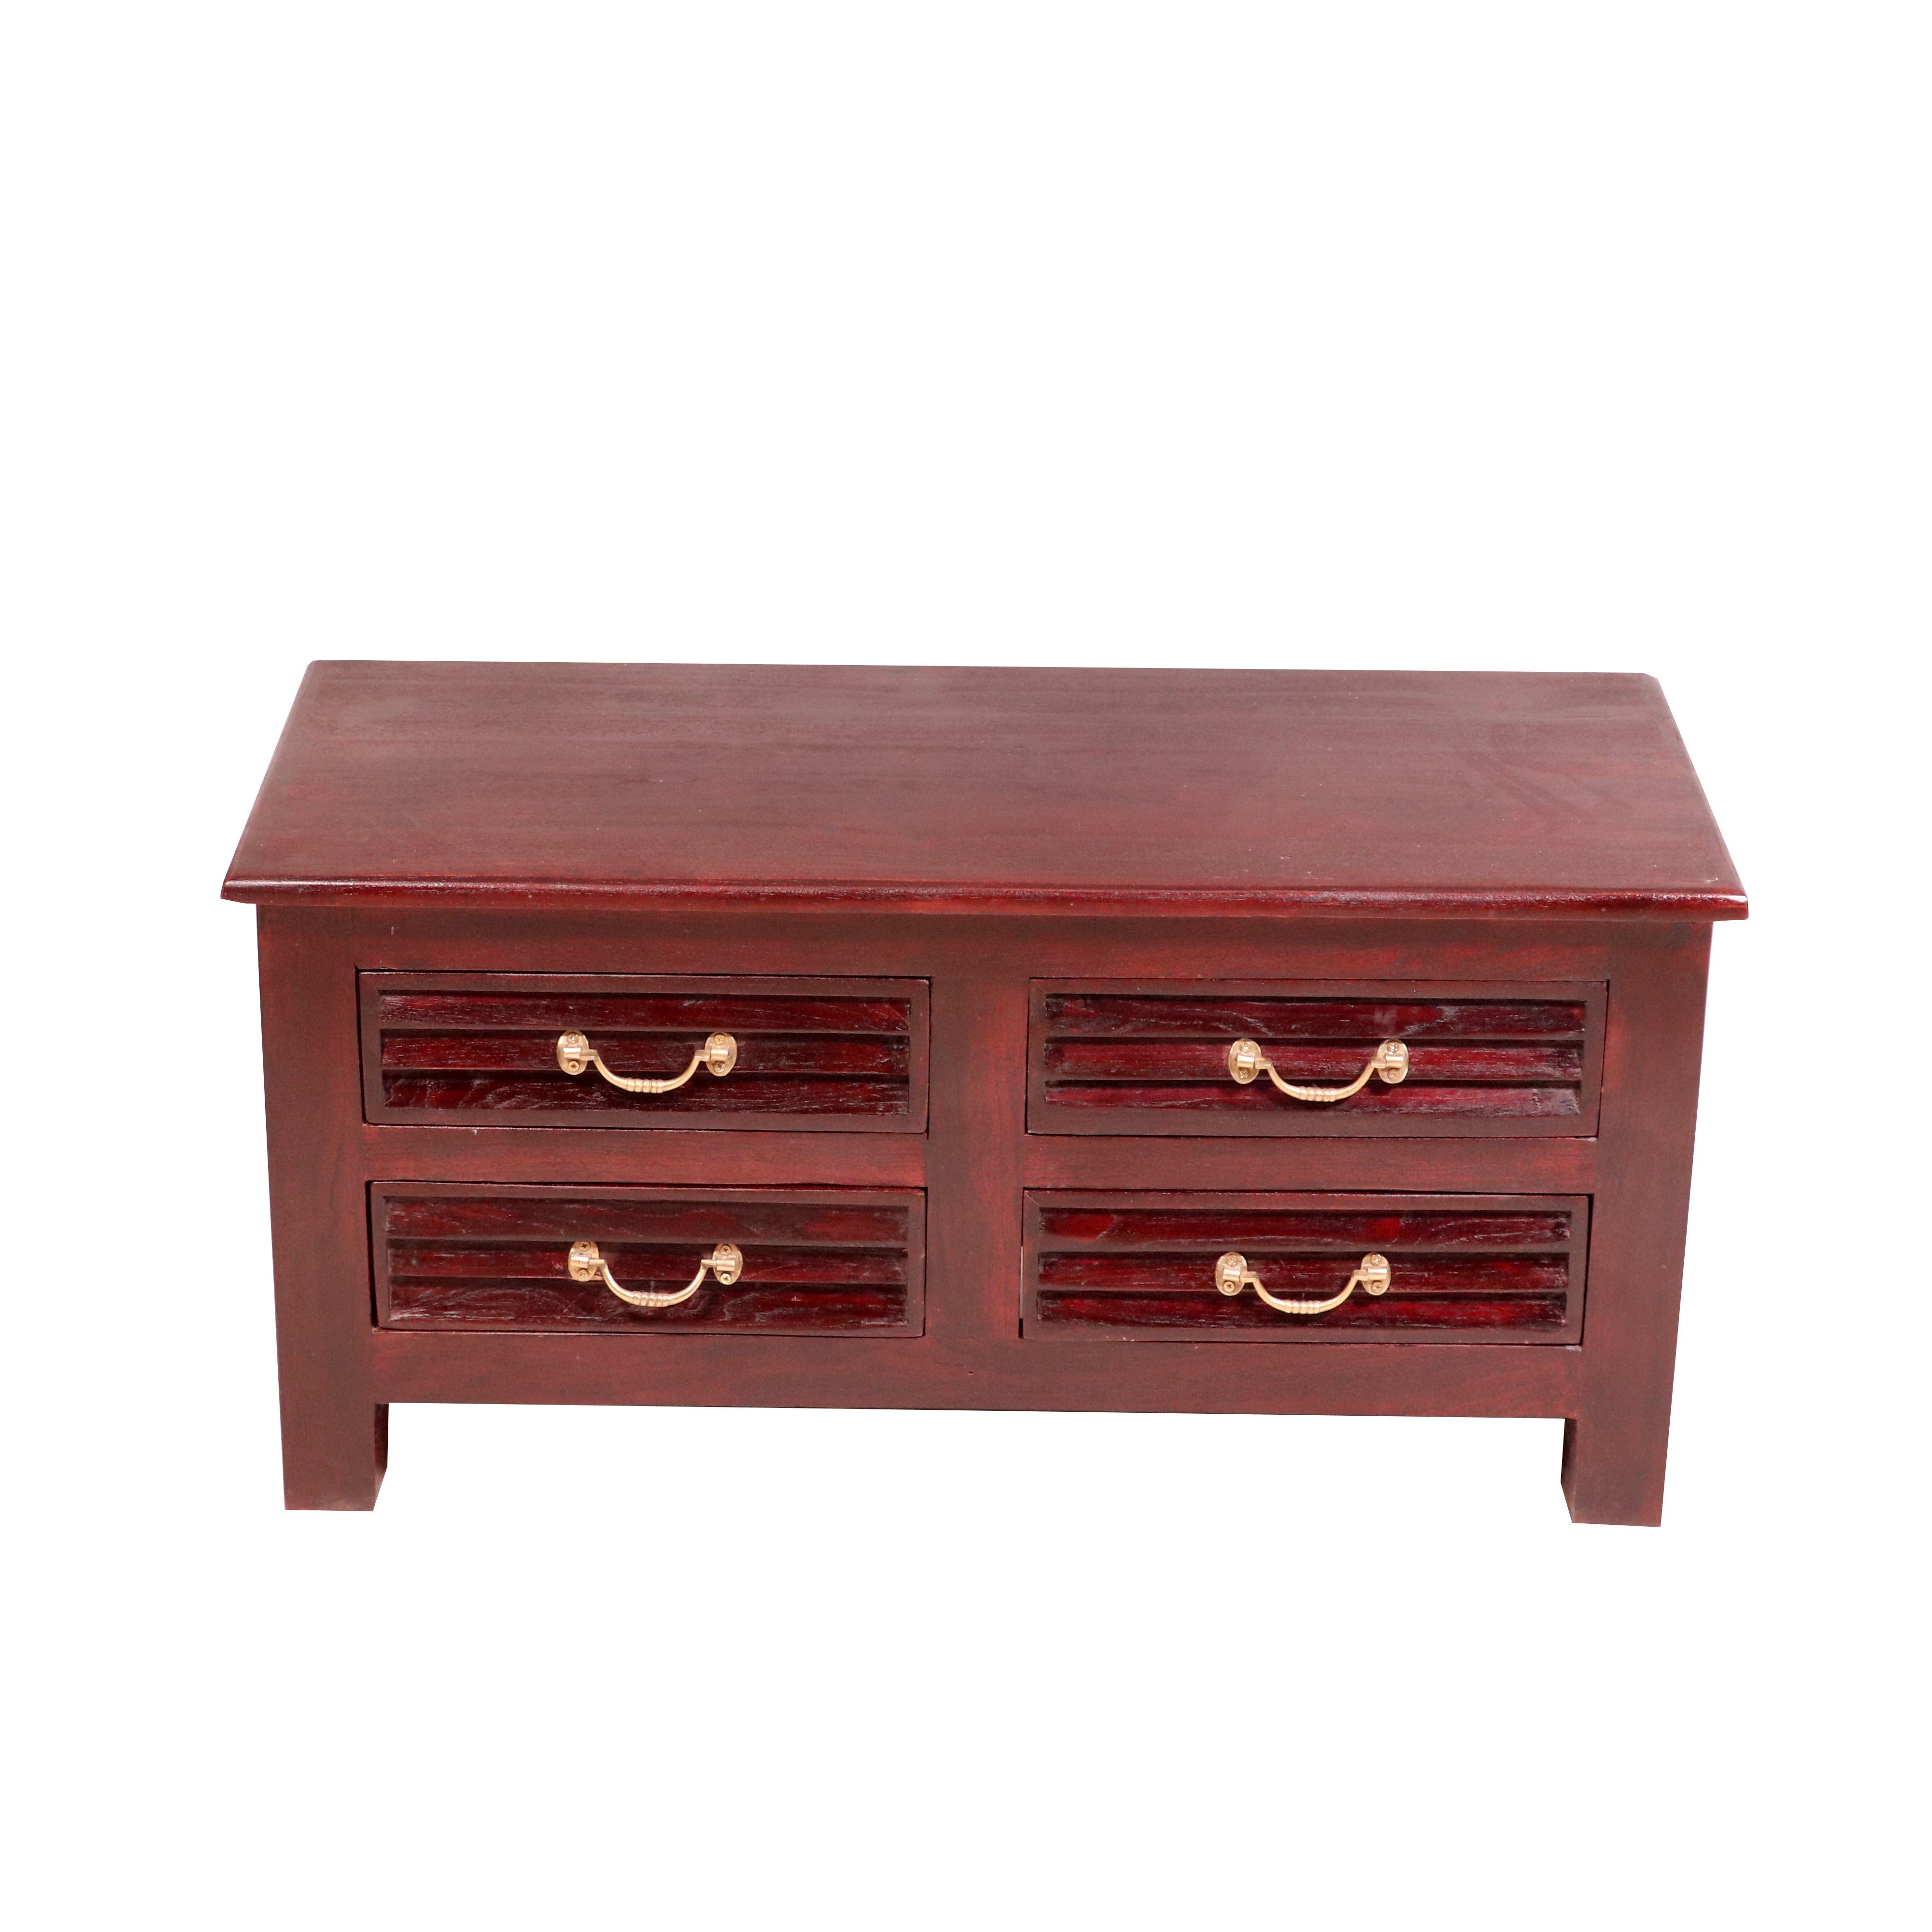 Solid wood 4 Drawer's chest with shutter design Bedside